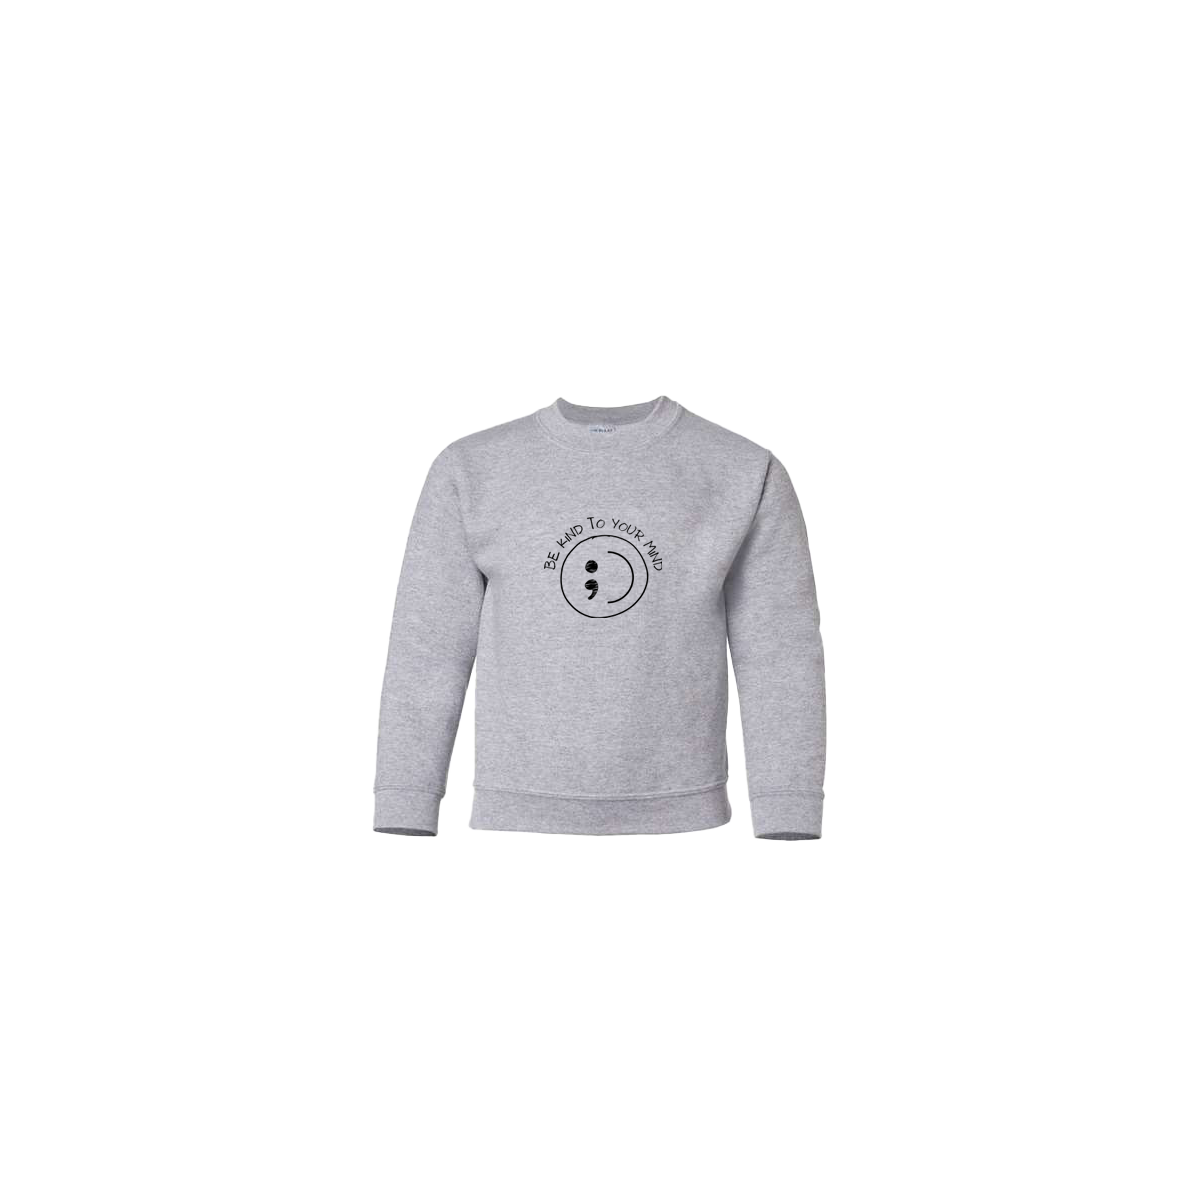 Be Kind To Your Mind Smiley Face Embroidered Grey Youth Crewneck